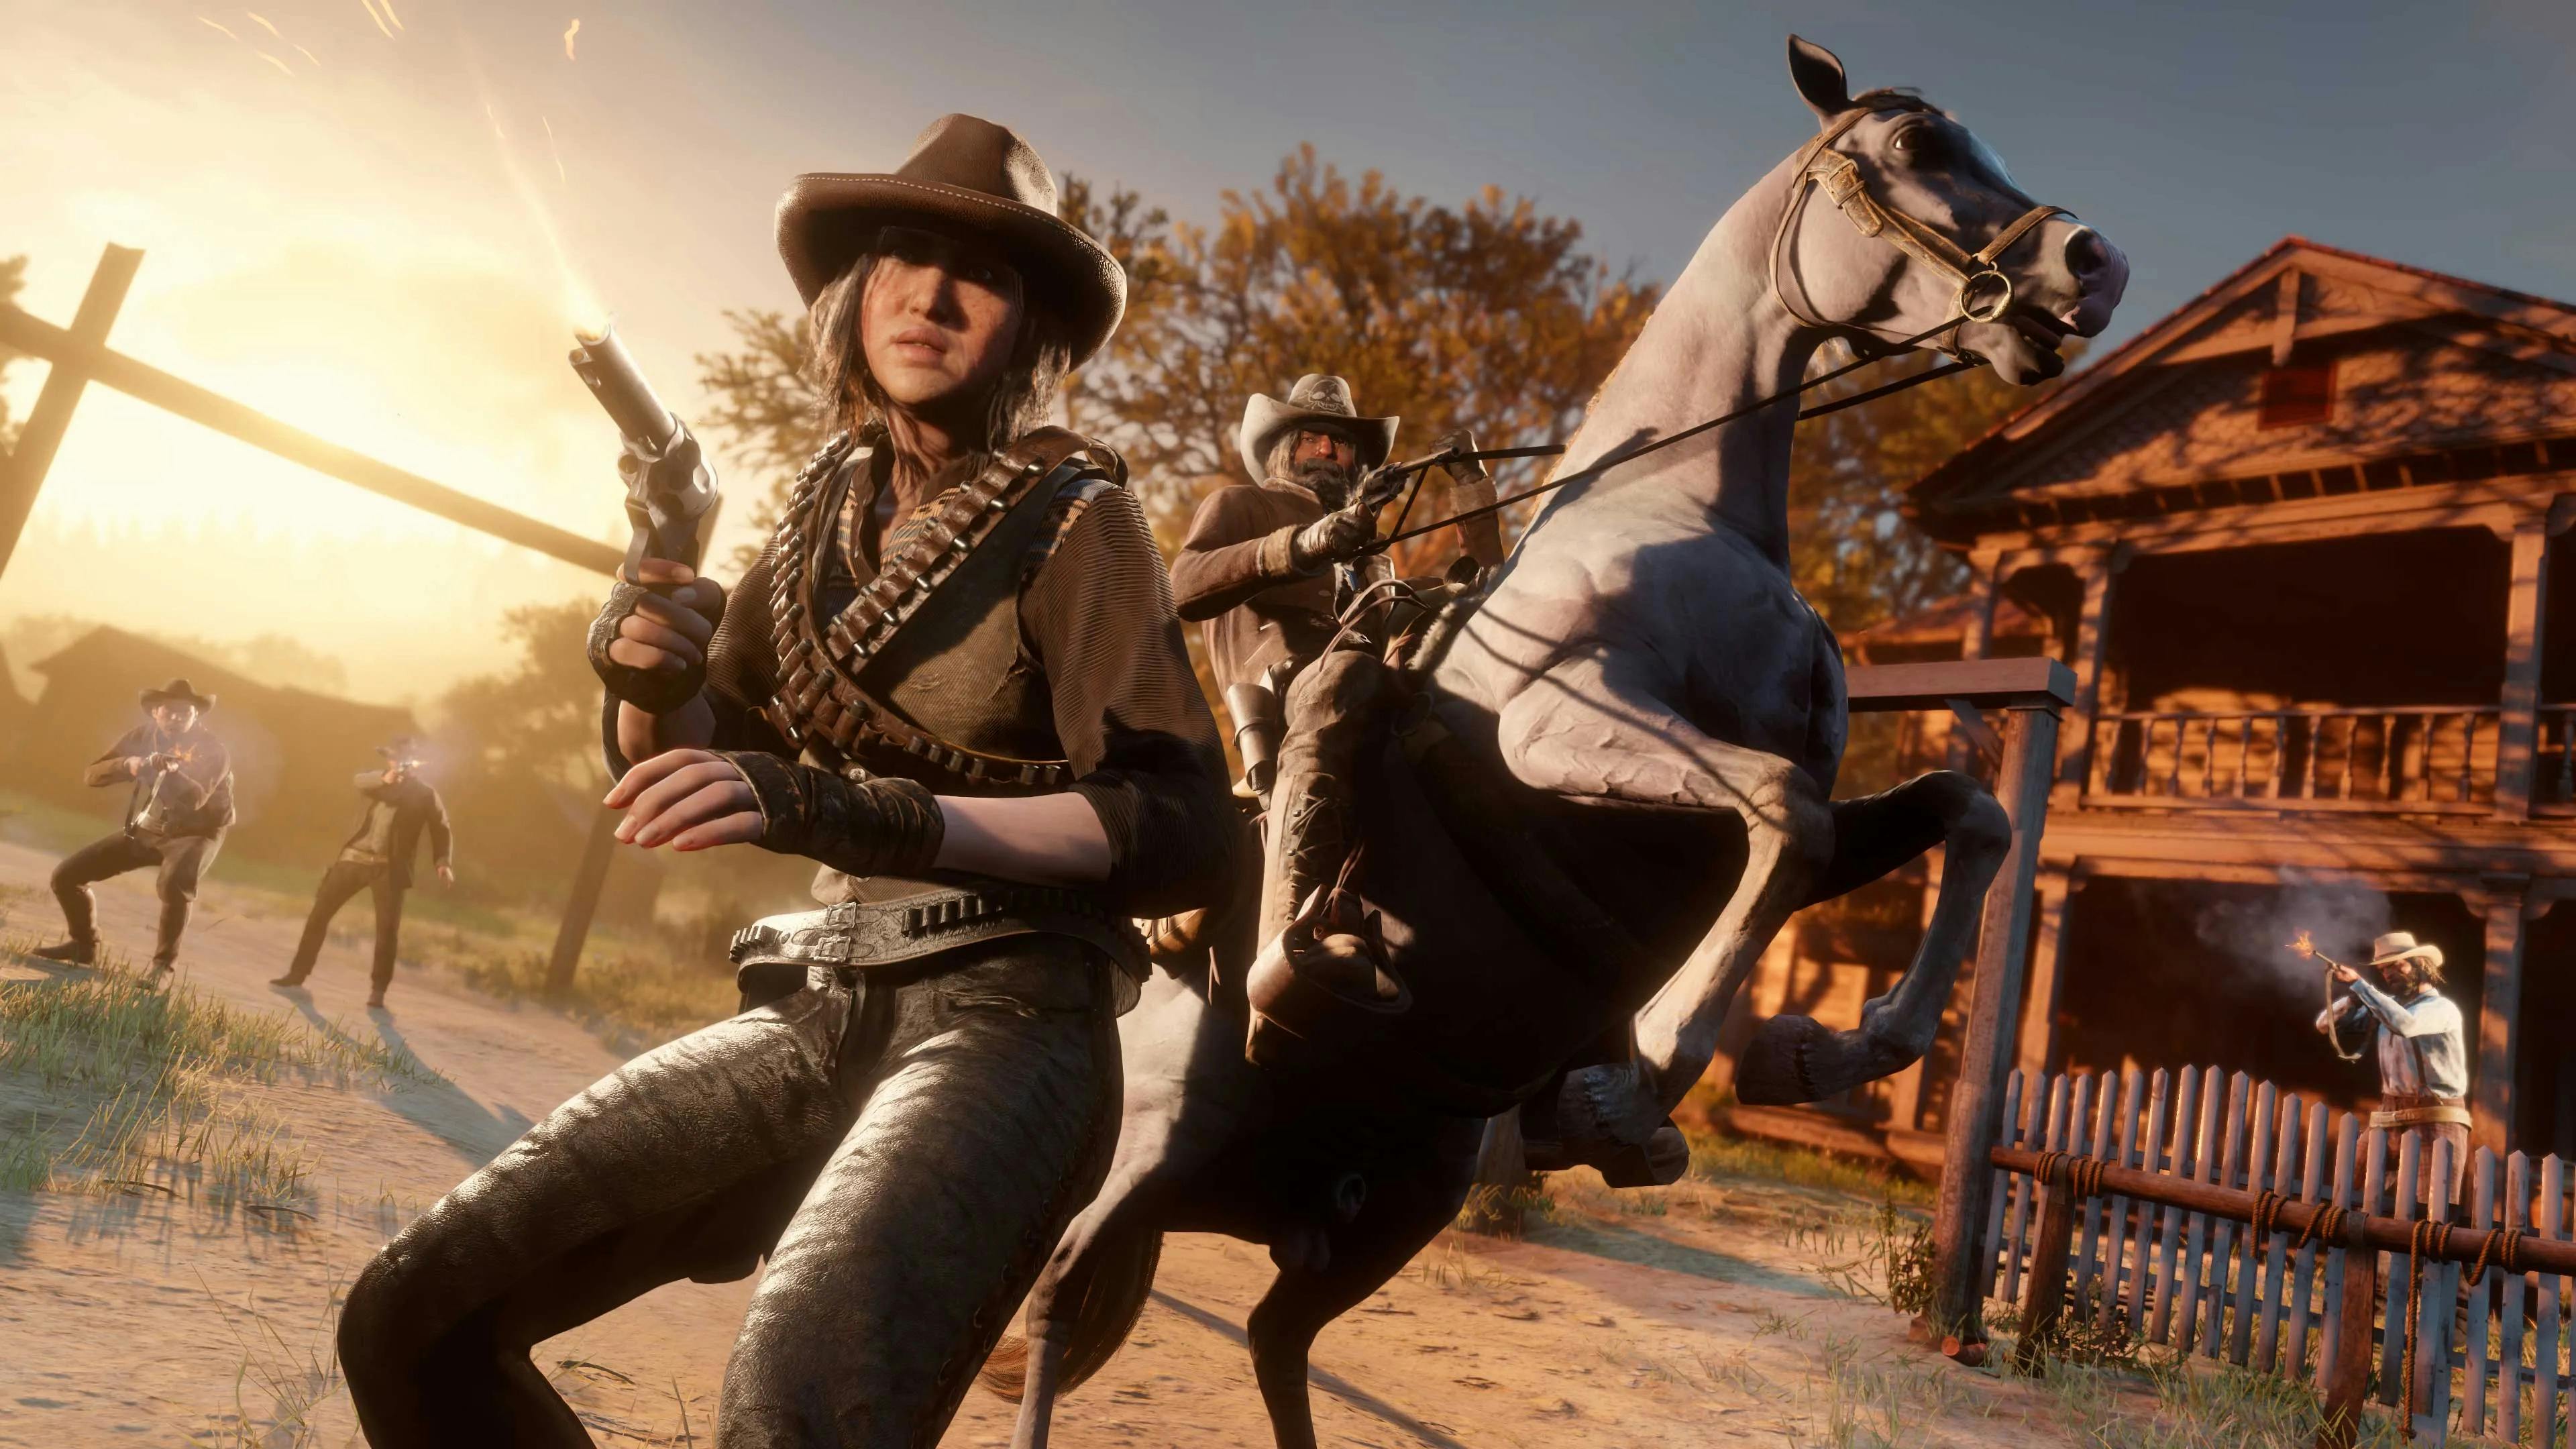 Red Dead Redemption 3 could potentially have a female protagonist.